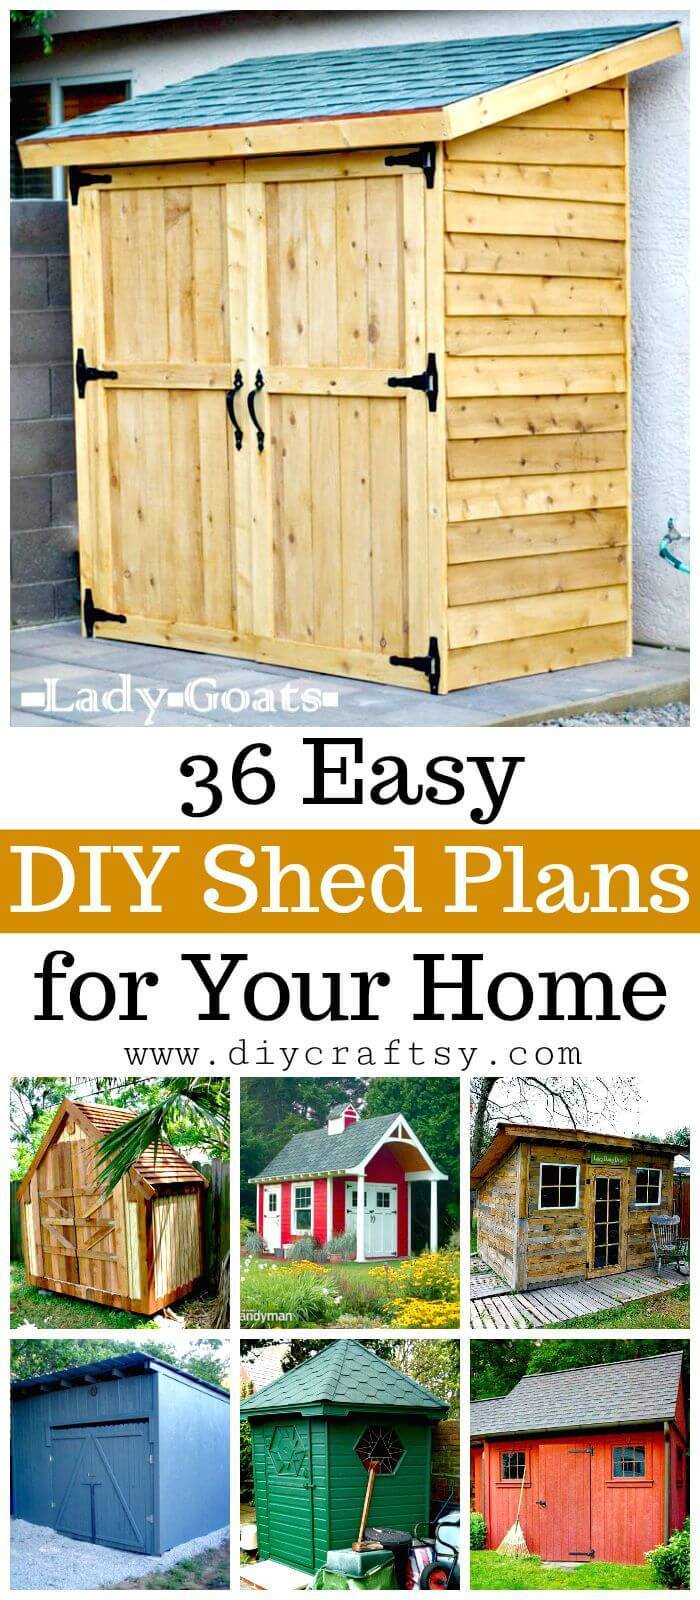 DIY Shed Plans - 36 Easy DIY Shed Designs for Your Home